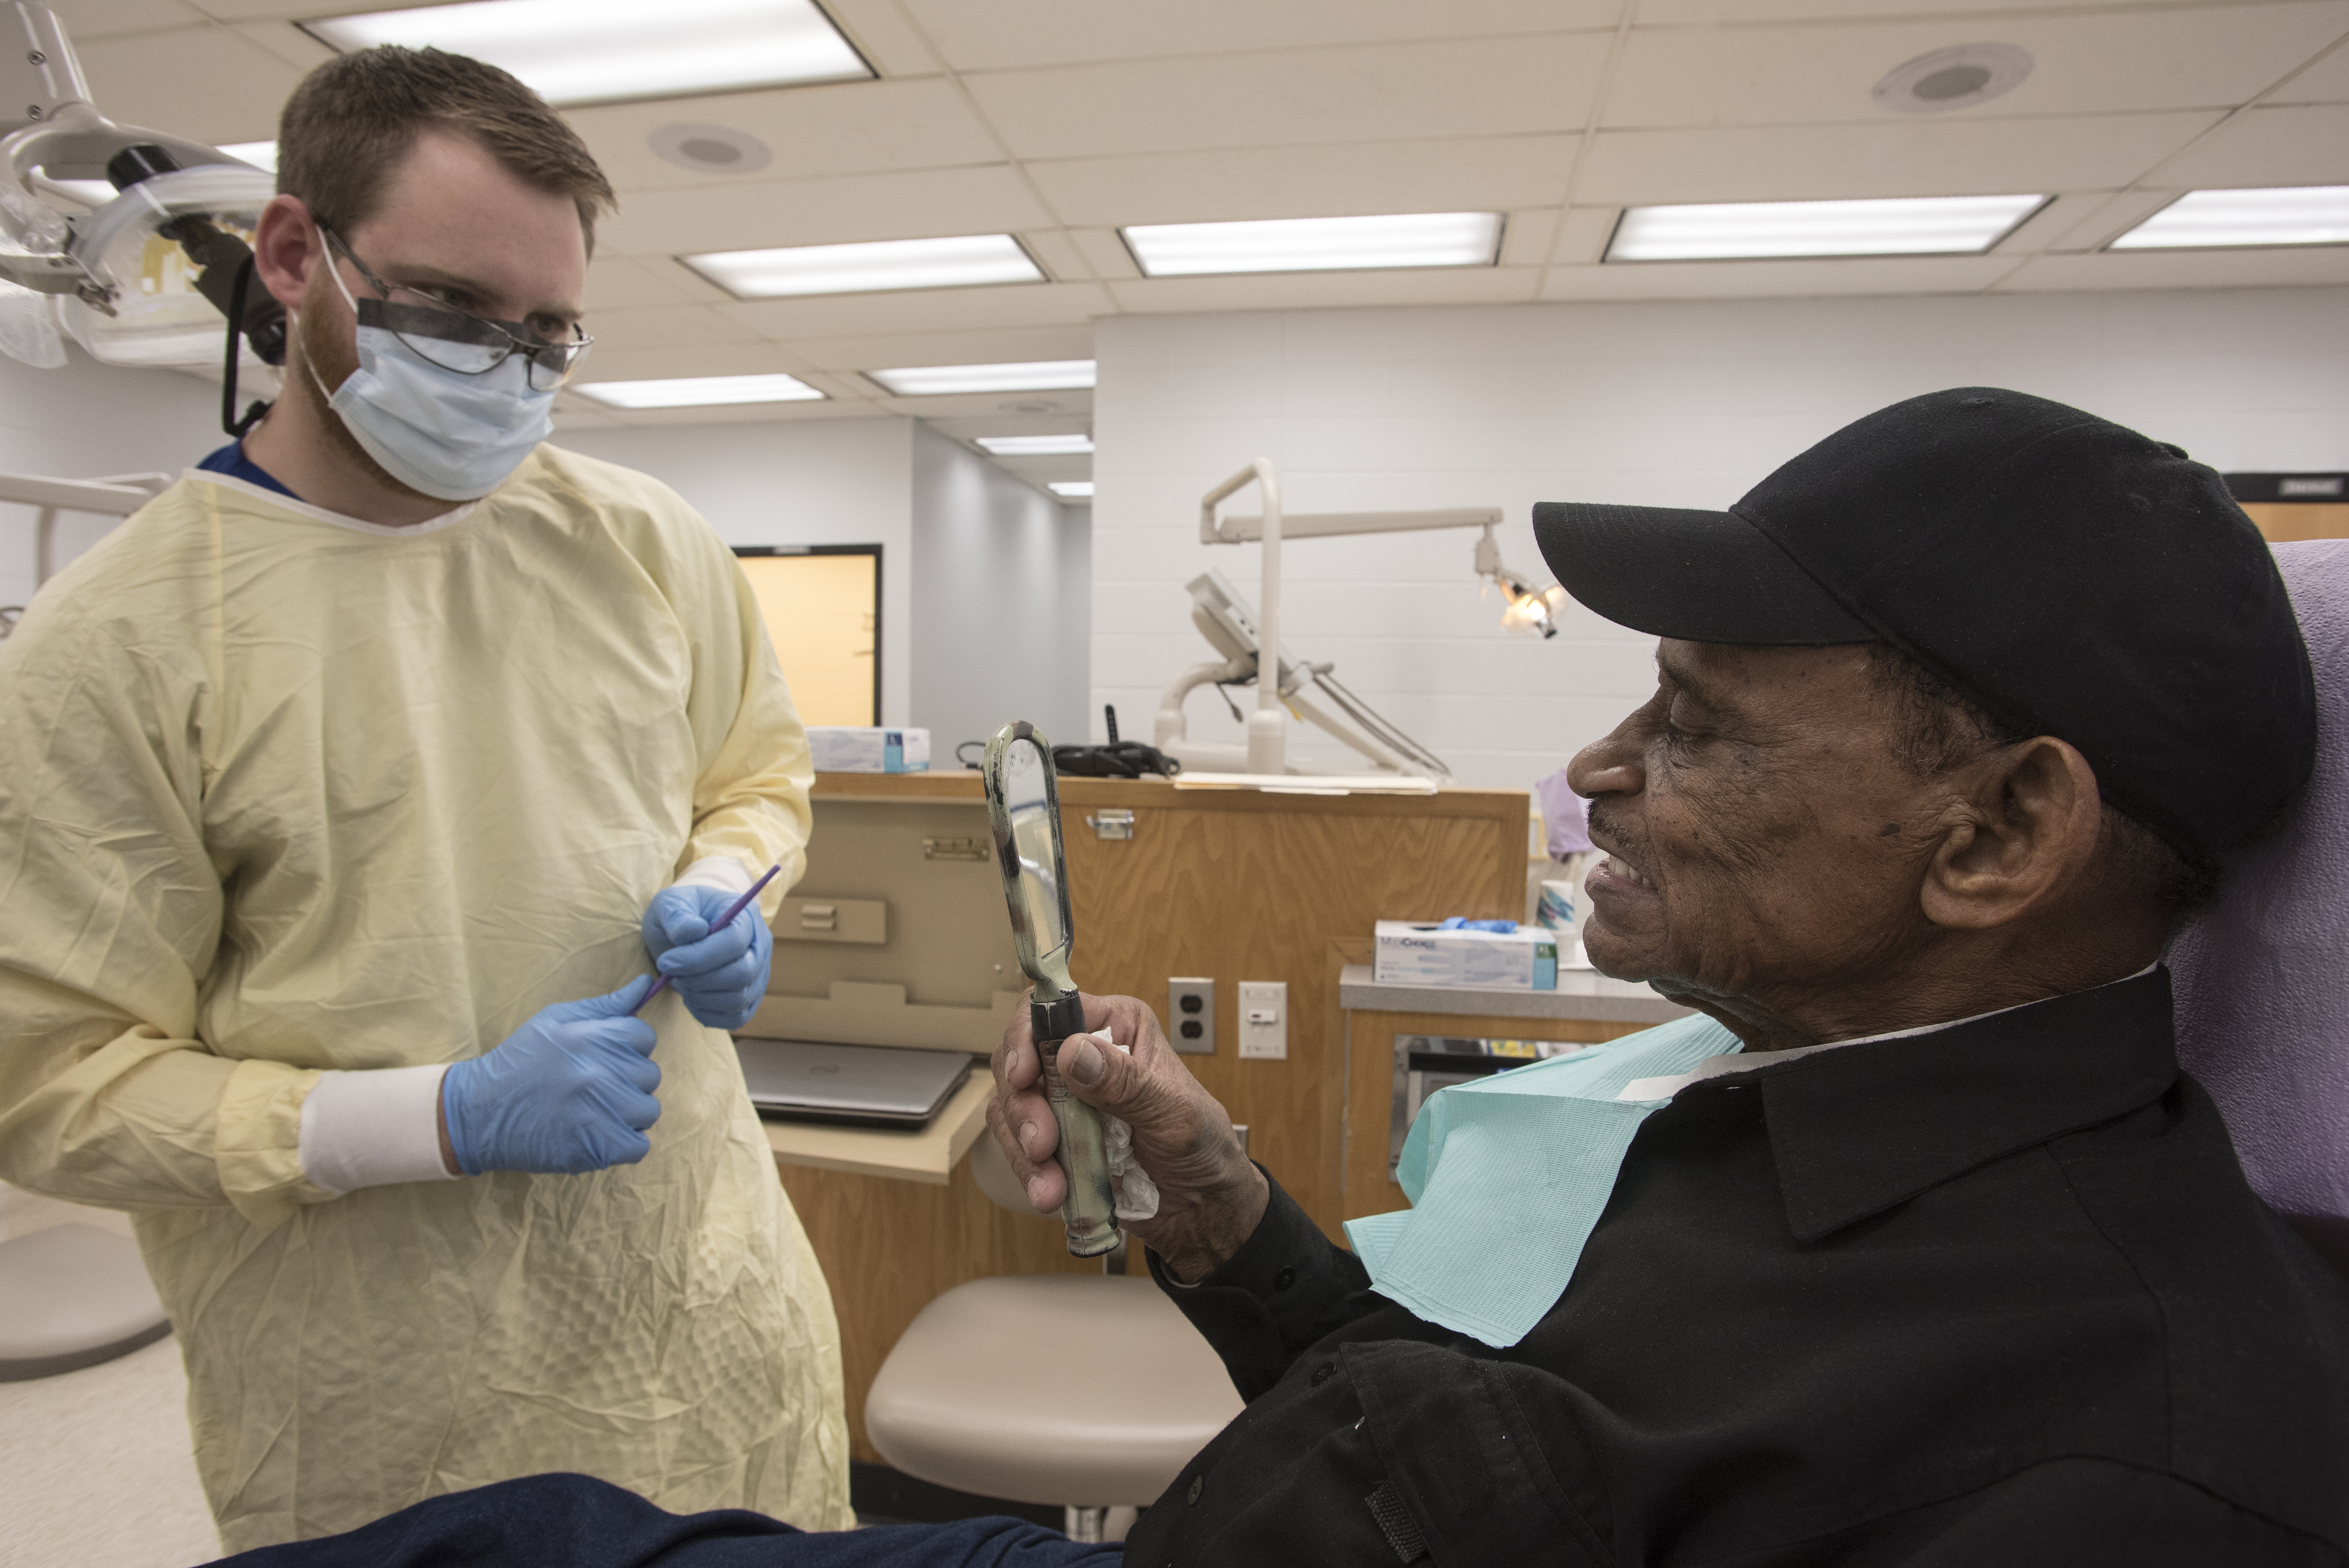 Glover, left, makes minor adjustments to Sutton's dentures during a fitting appointment on Wednesday.